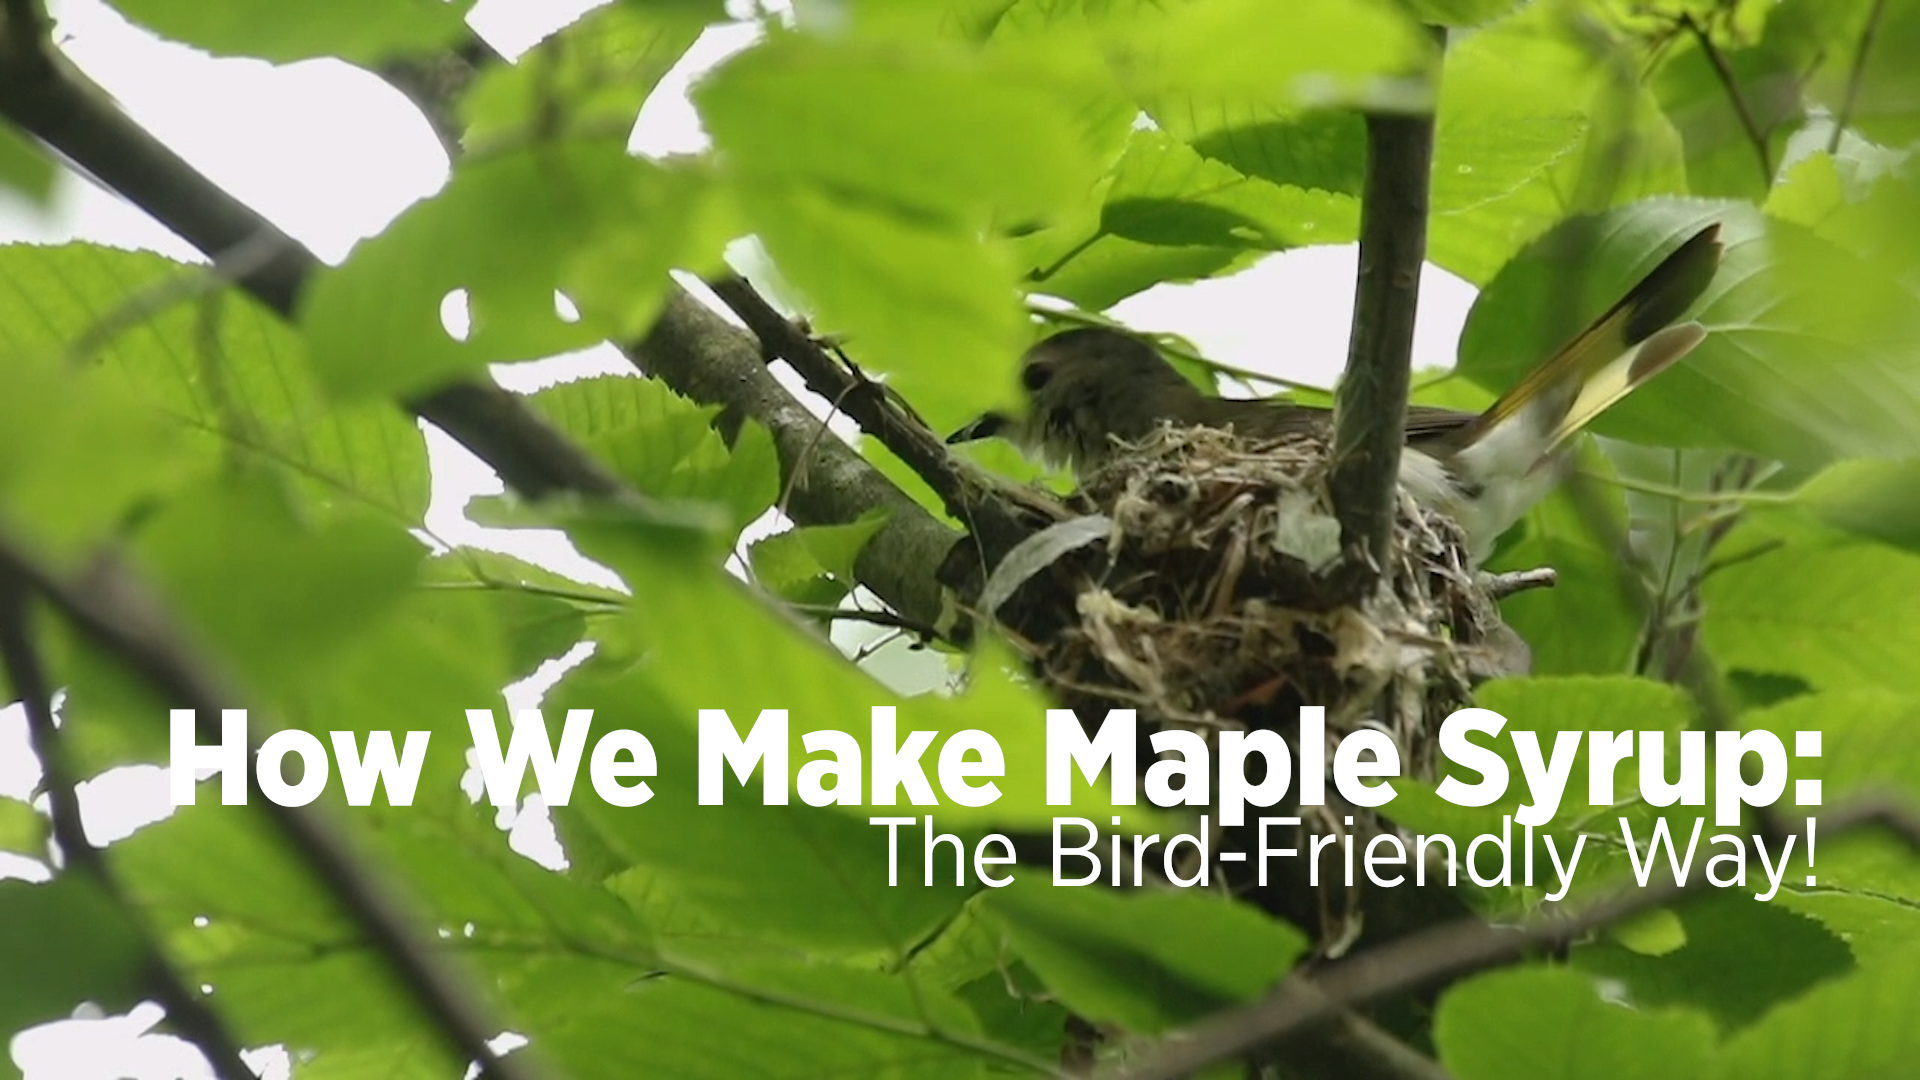 American Redstart in a nest with text "How We Make Maple Syrup: The Bird-Friendly Way"